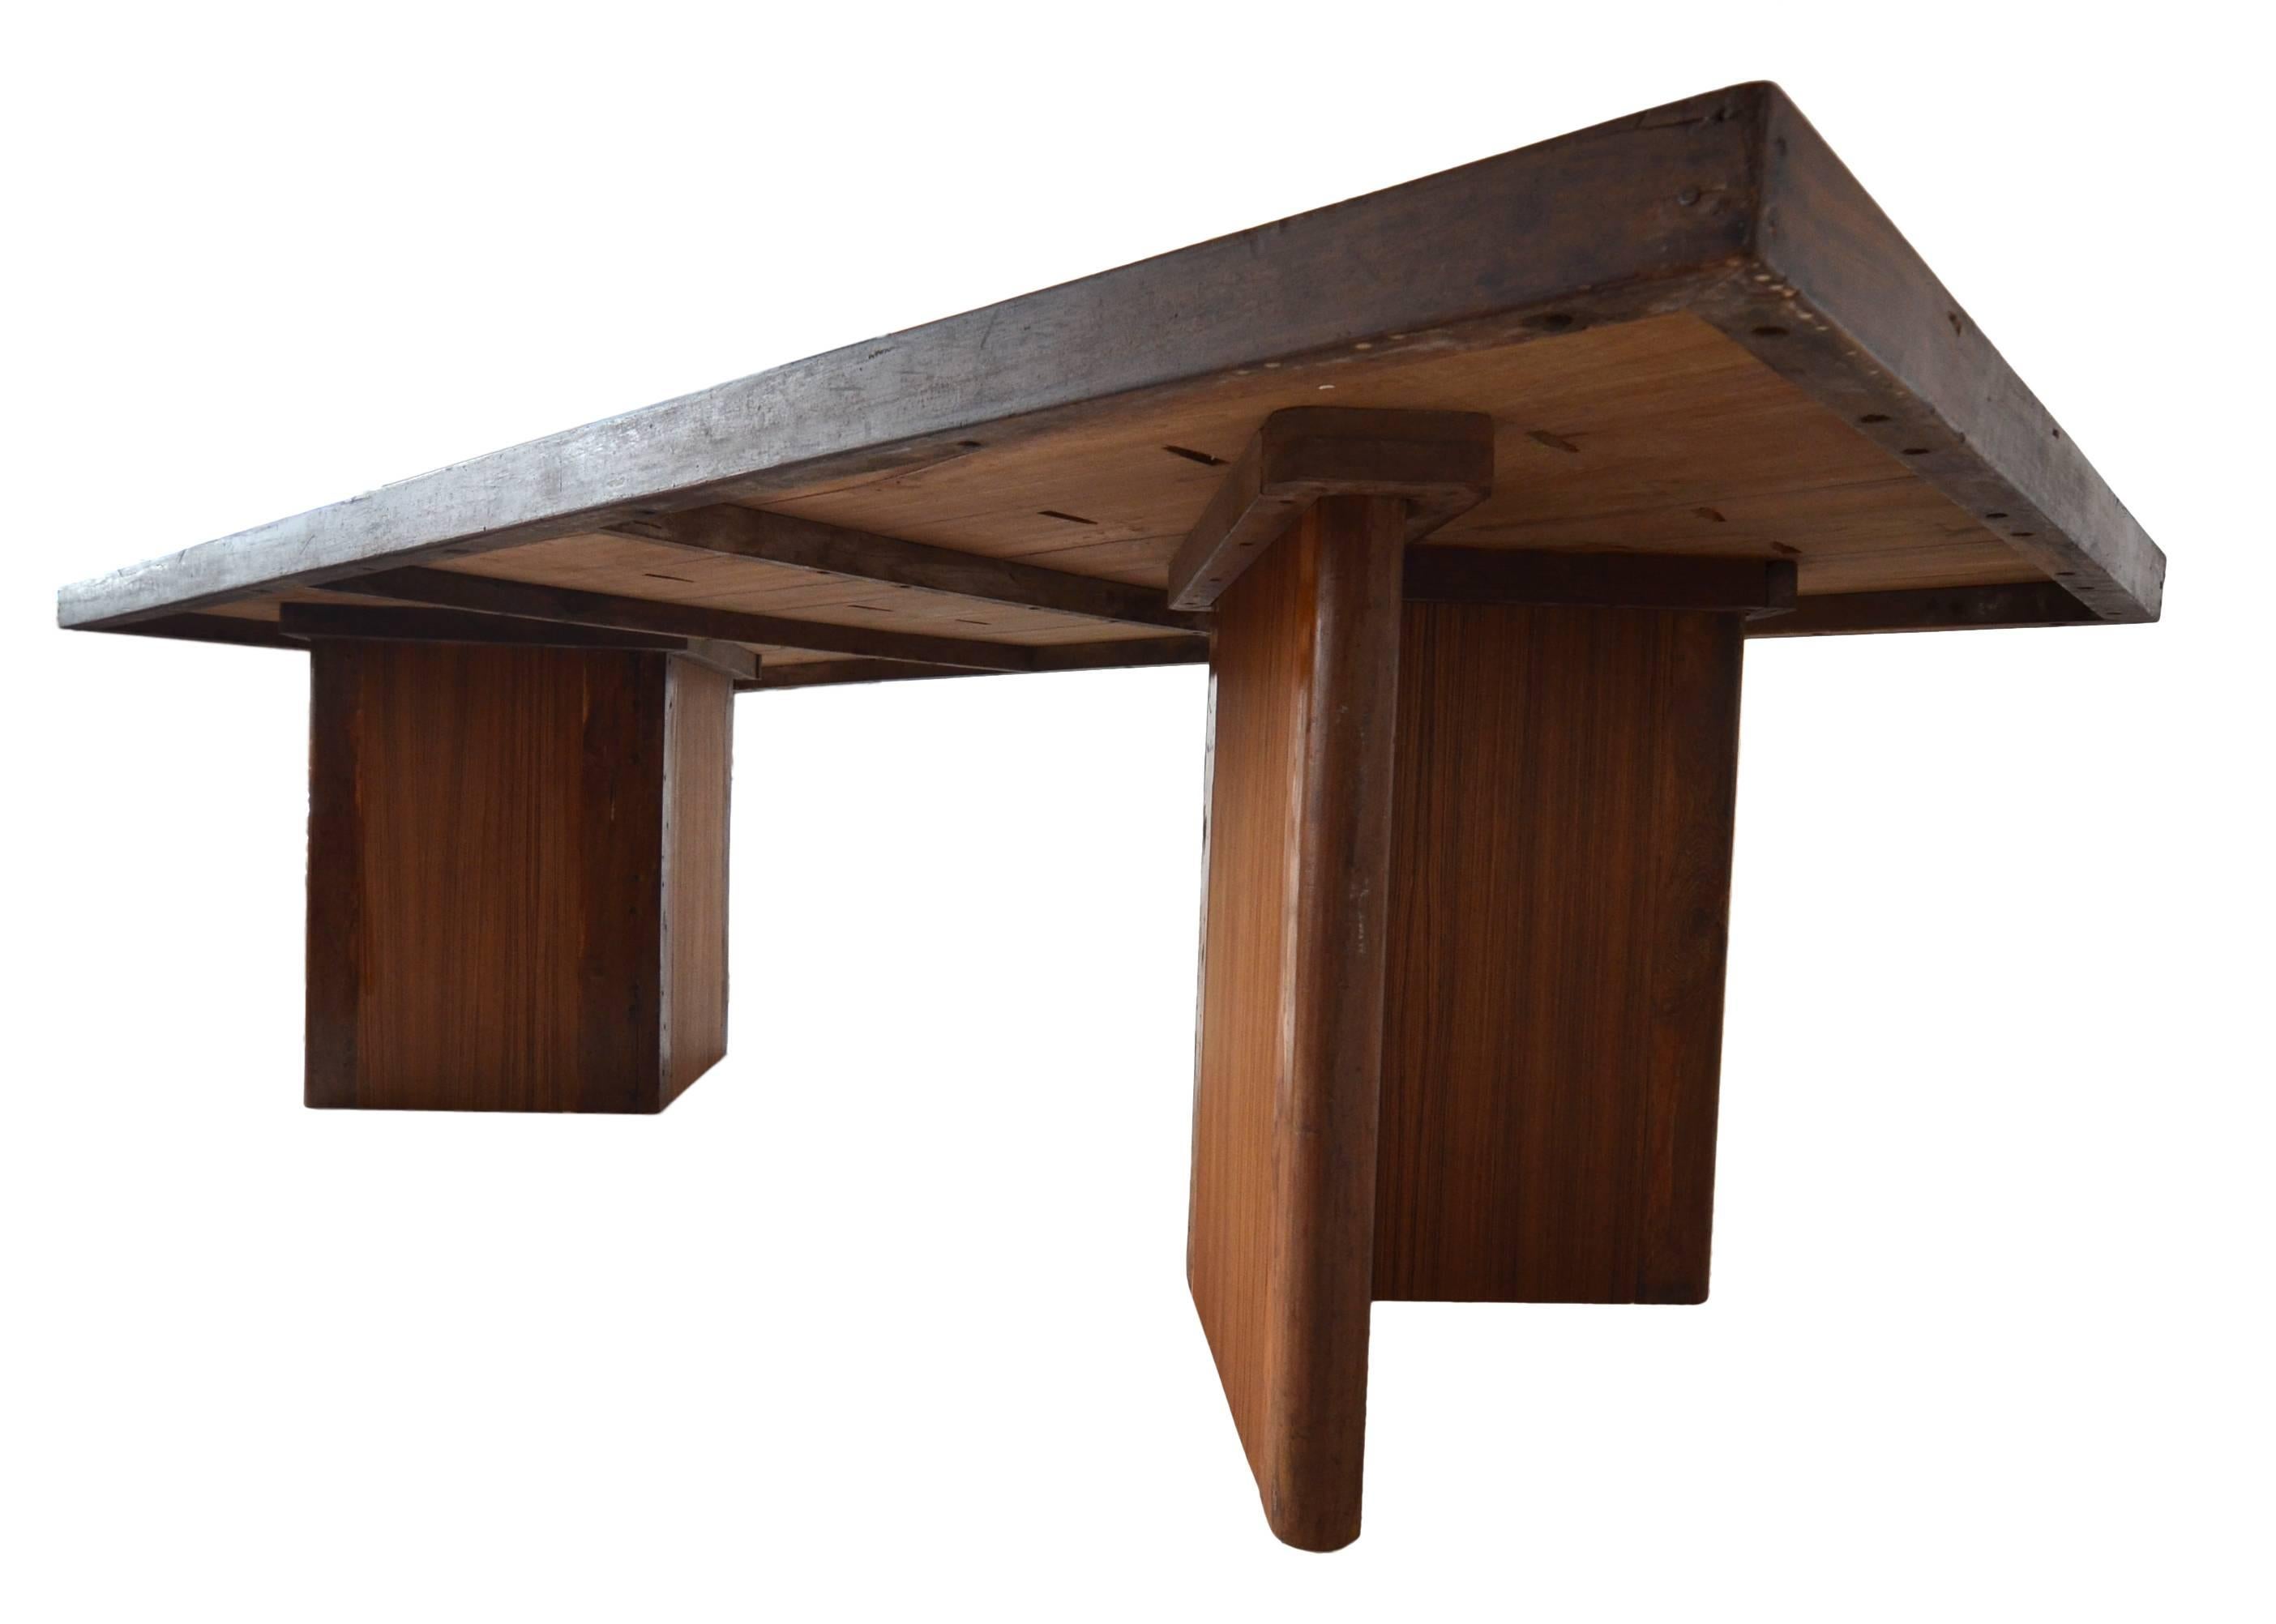 An incredible example of a very rare large library table by Pierre Jeanneret for the Chandigarh Project, circa 1955.

This example is in teak. An incredible solid book matched teak top with solid and veneered teak legs.
One of the best correct